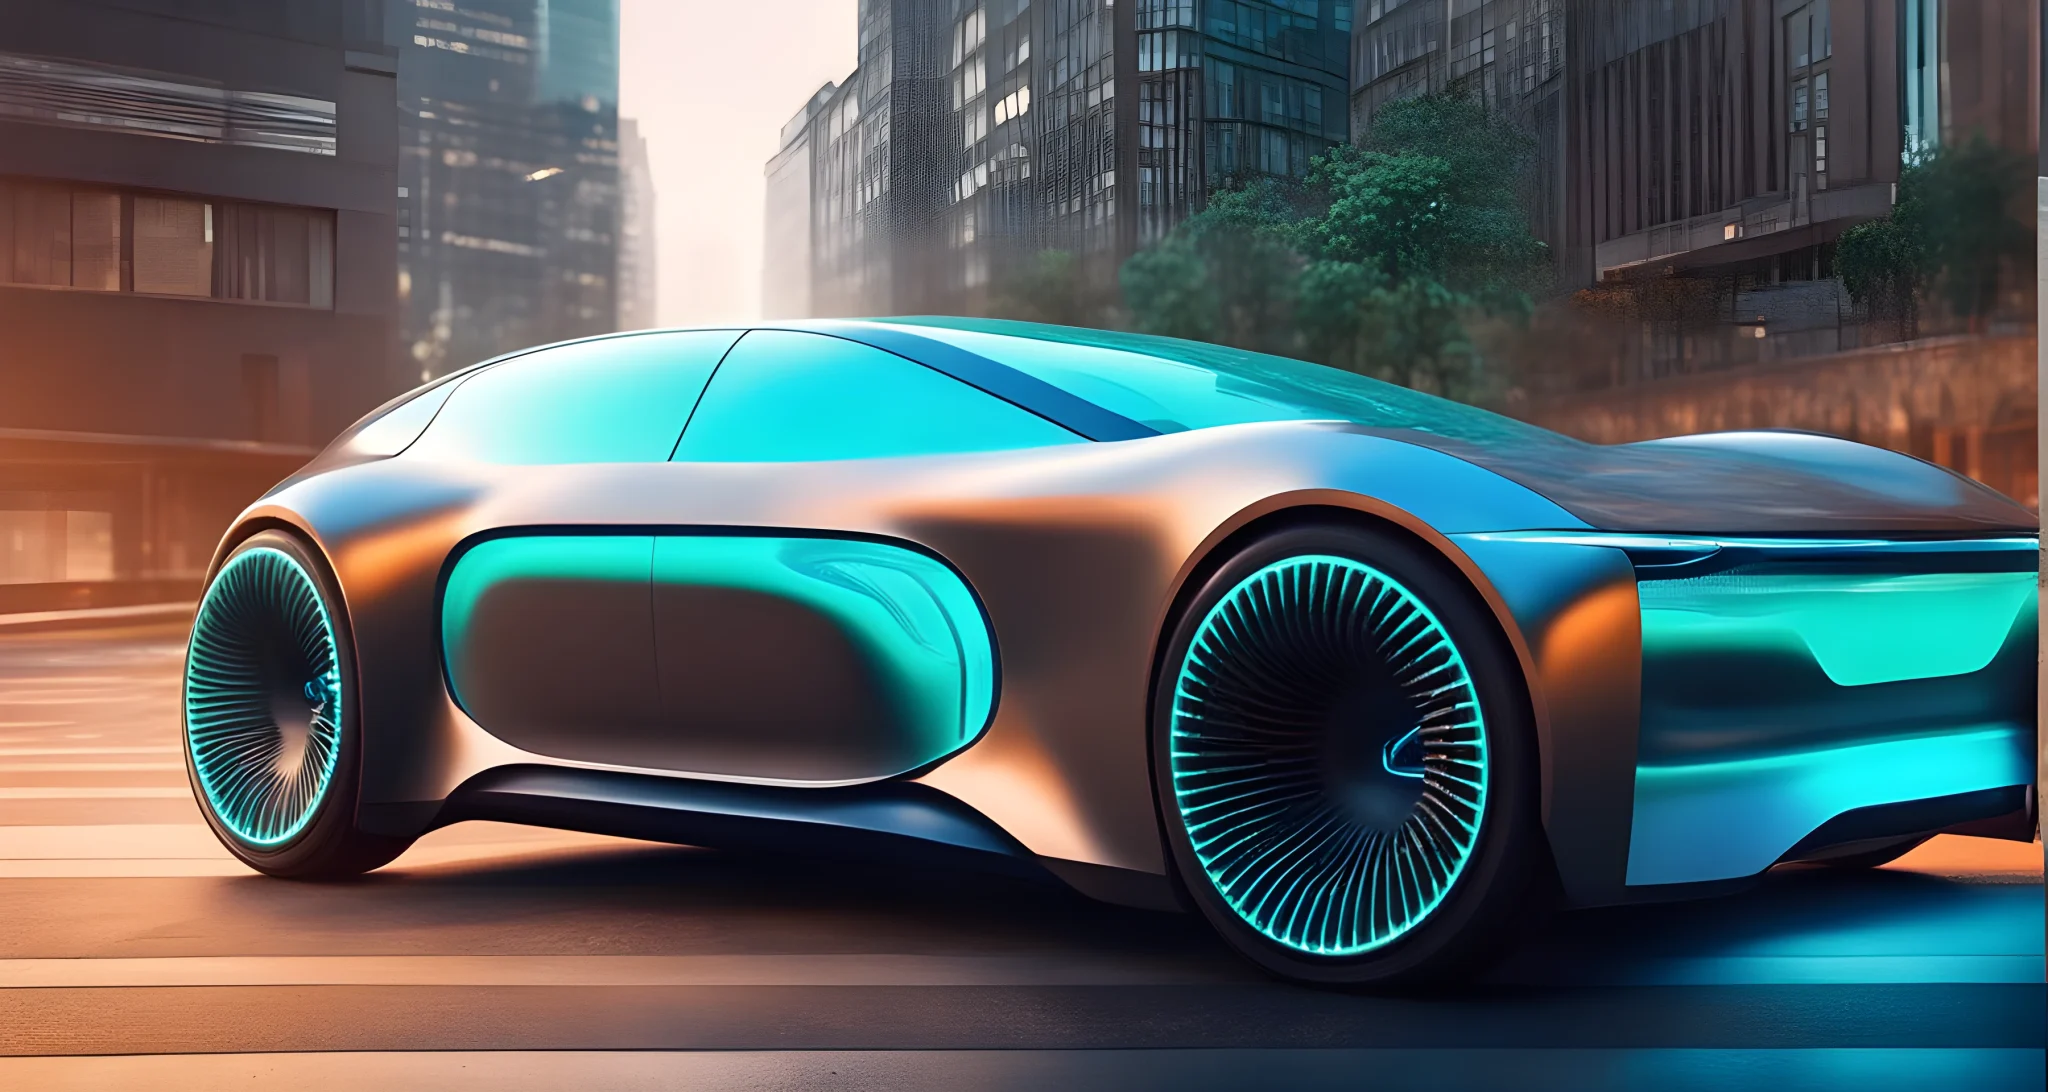 The image shows a futuristic electric vehicle with advanced connectivity features.